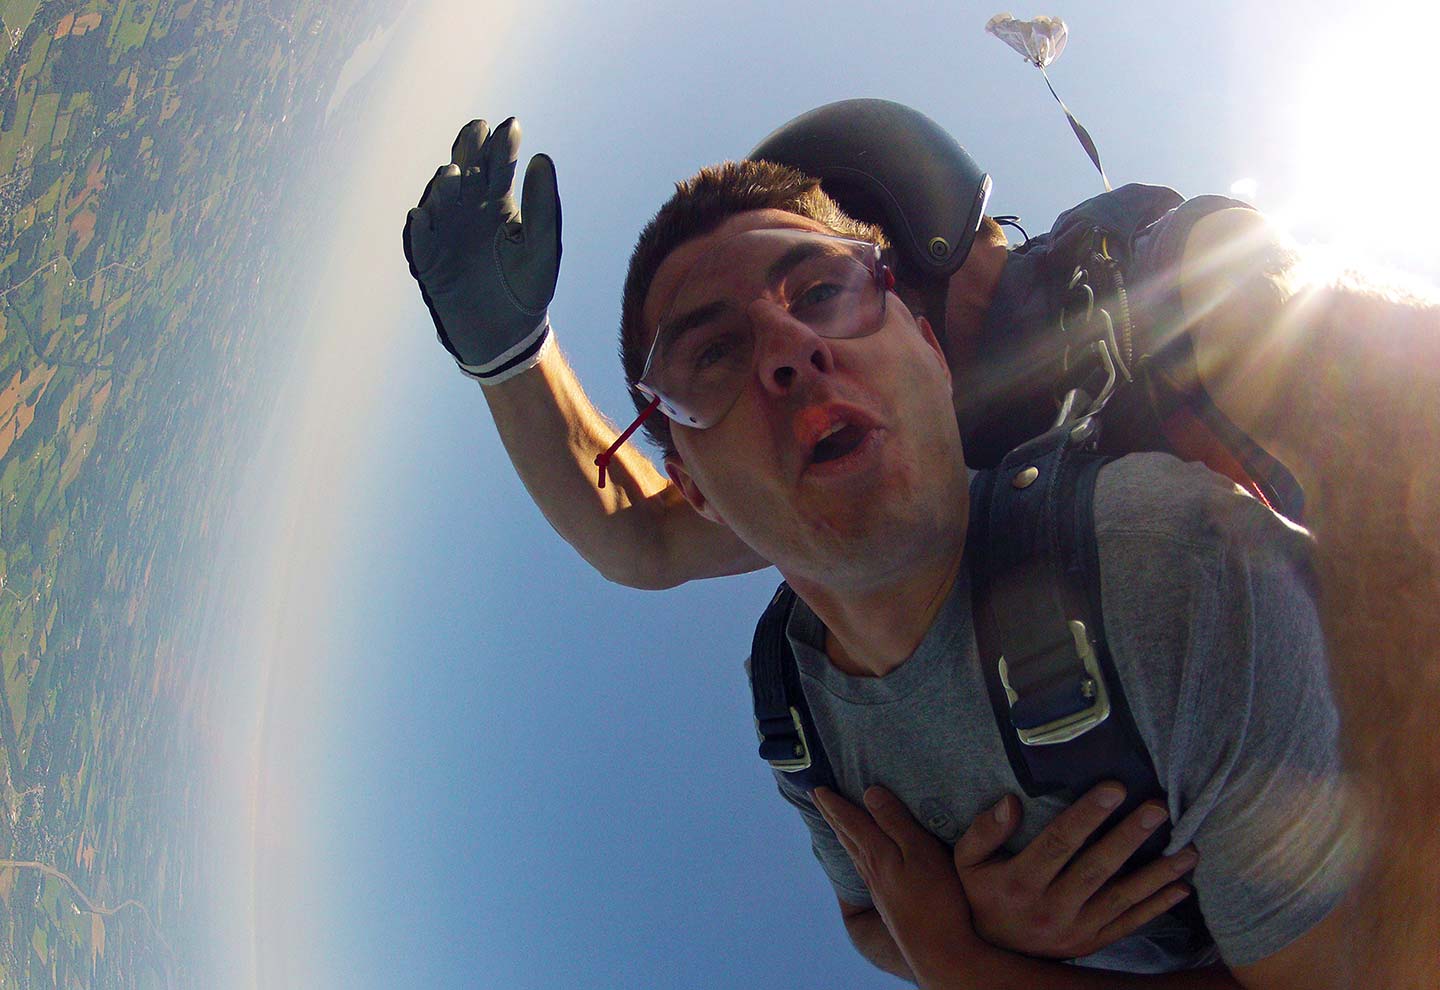 Jason in free fall while tandem skydiving with Skydive CNY